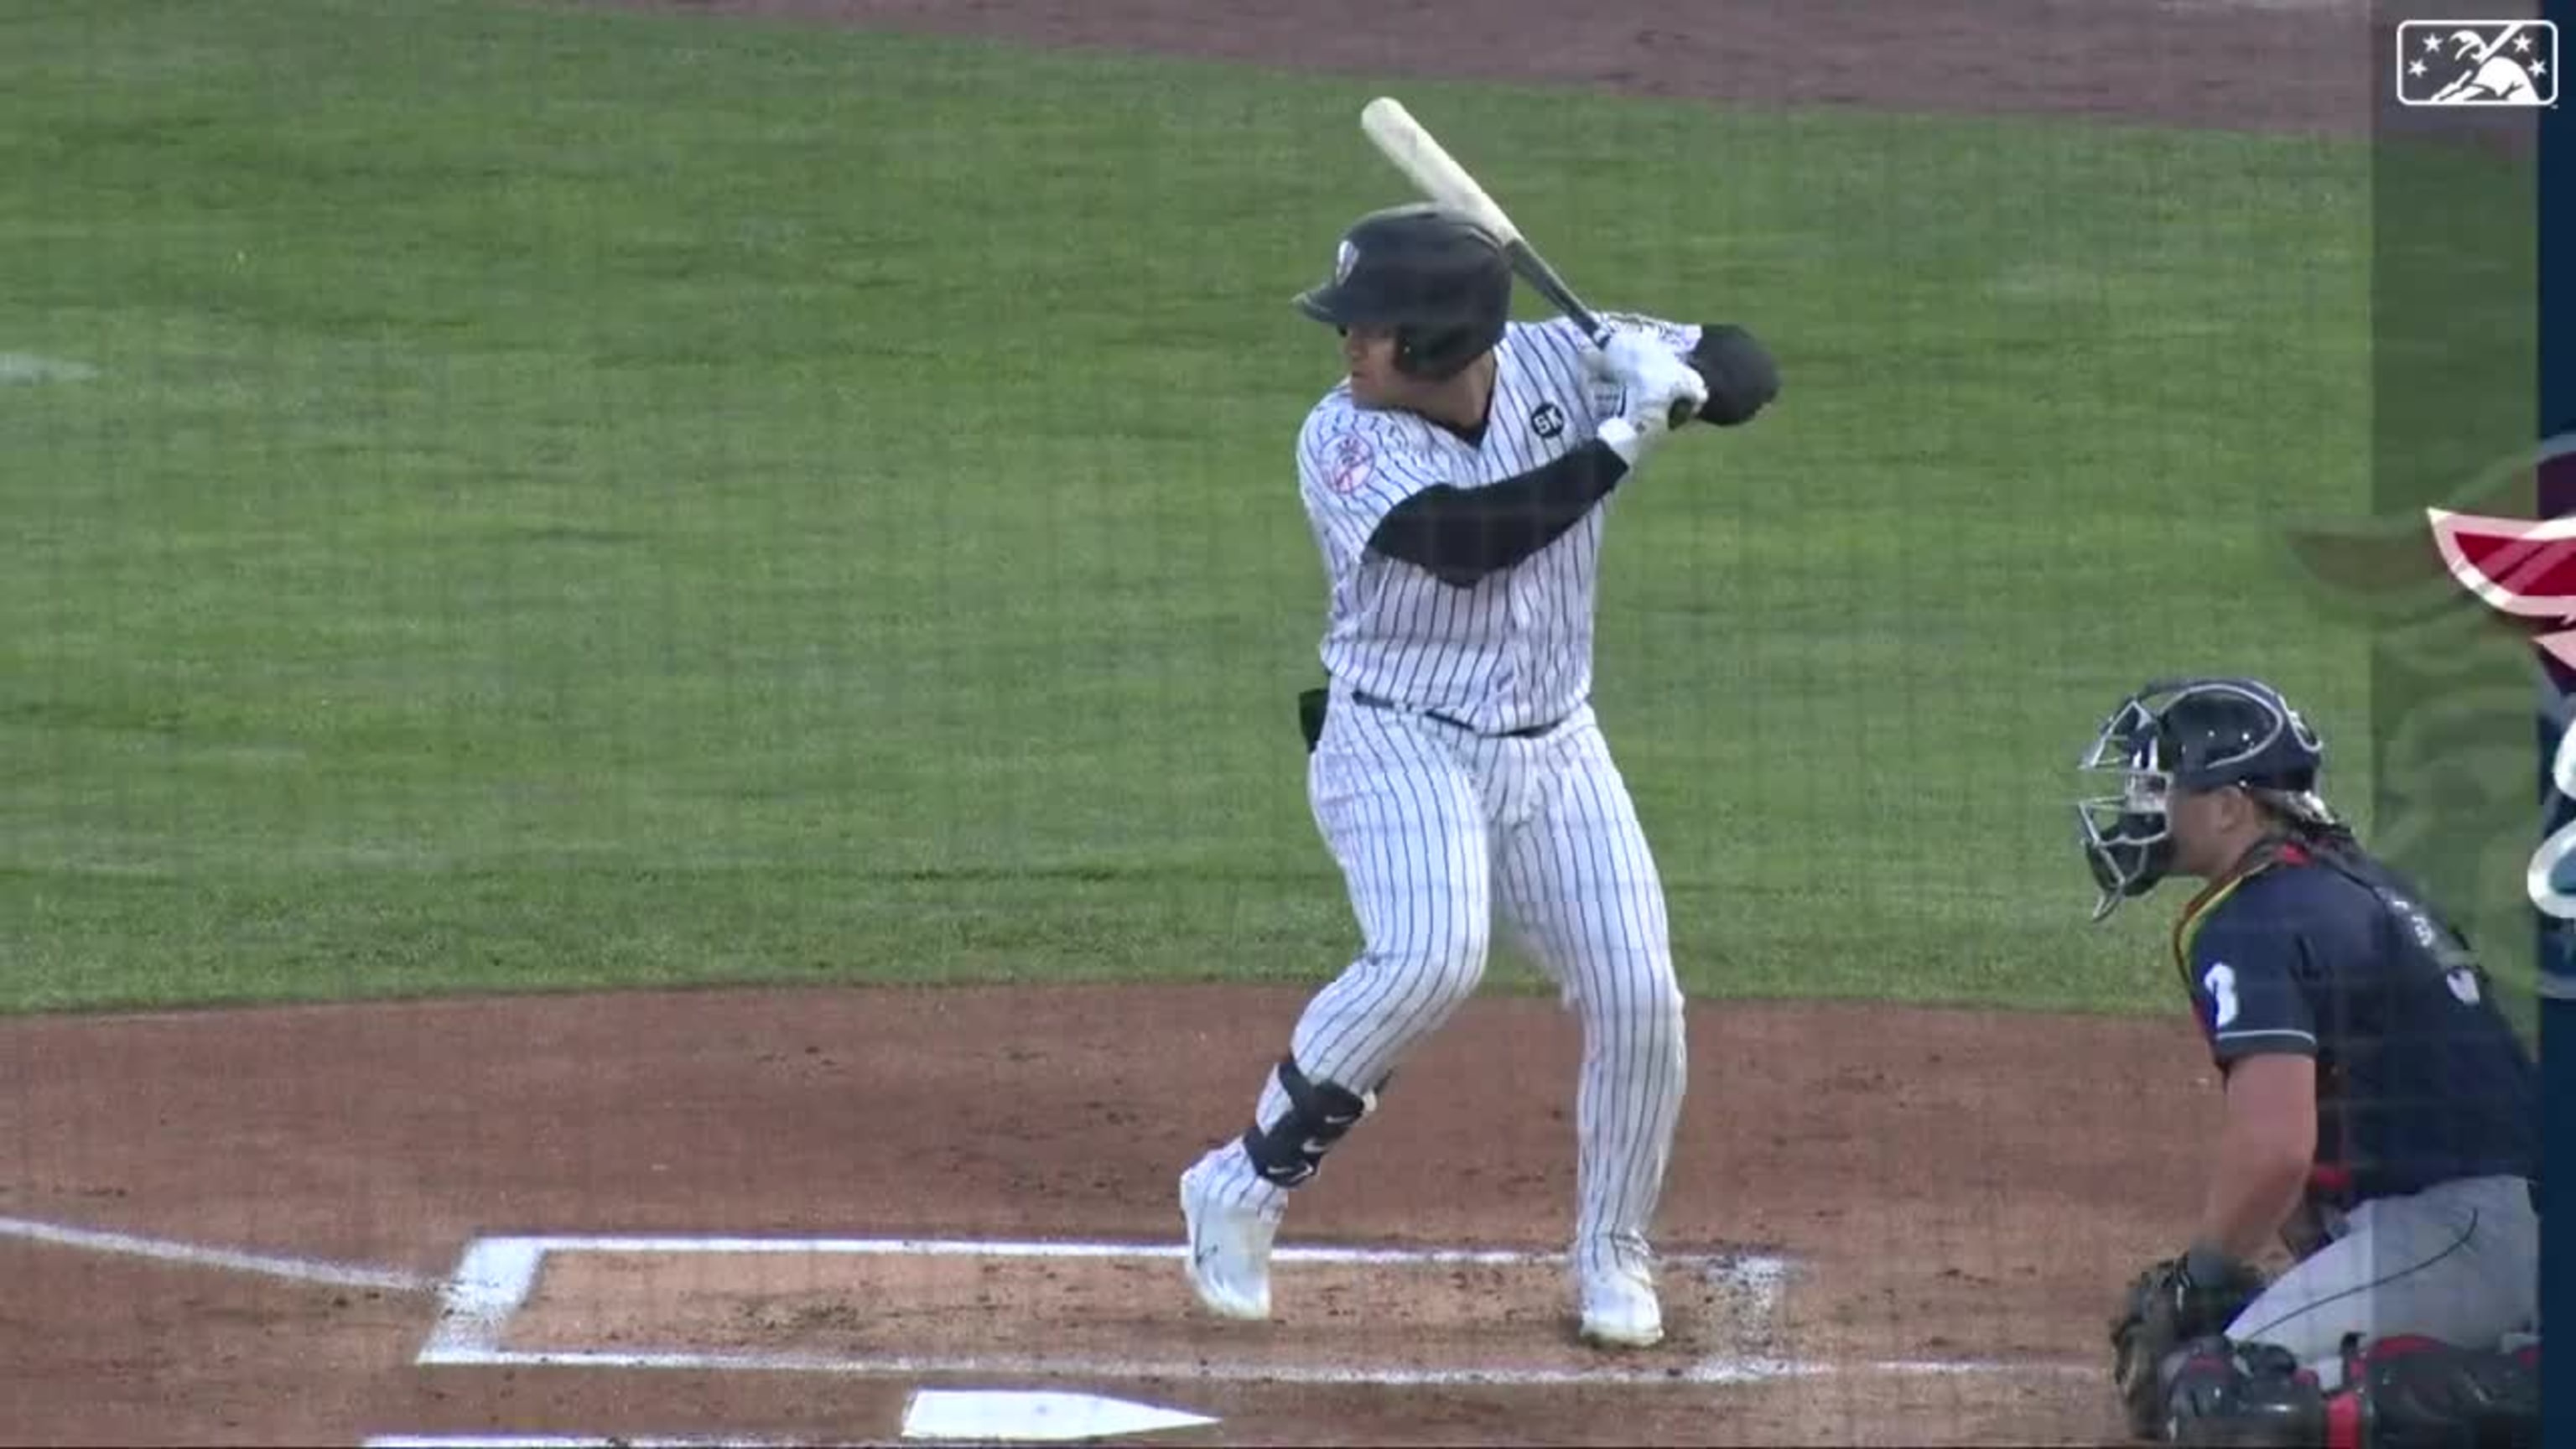 New York Yankees Prospect Jasson Dominguez Crushes Home Run in